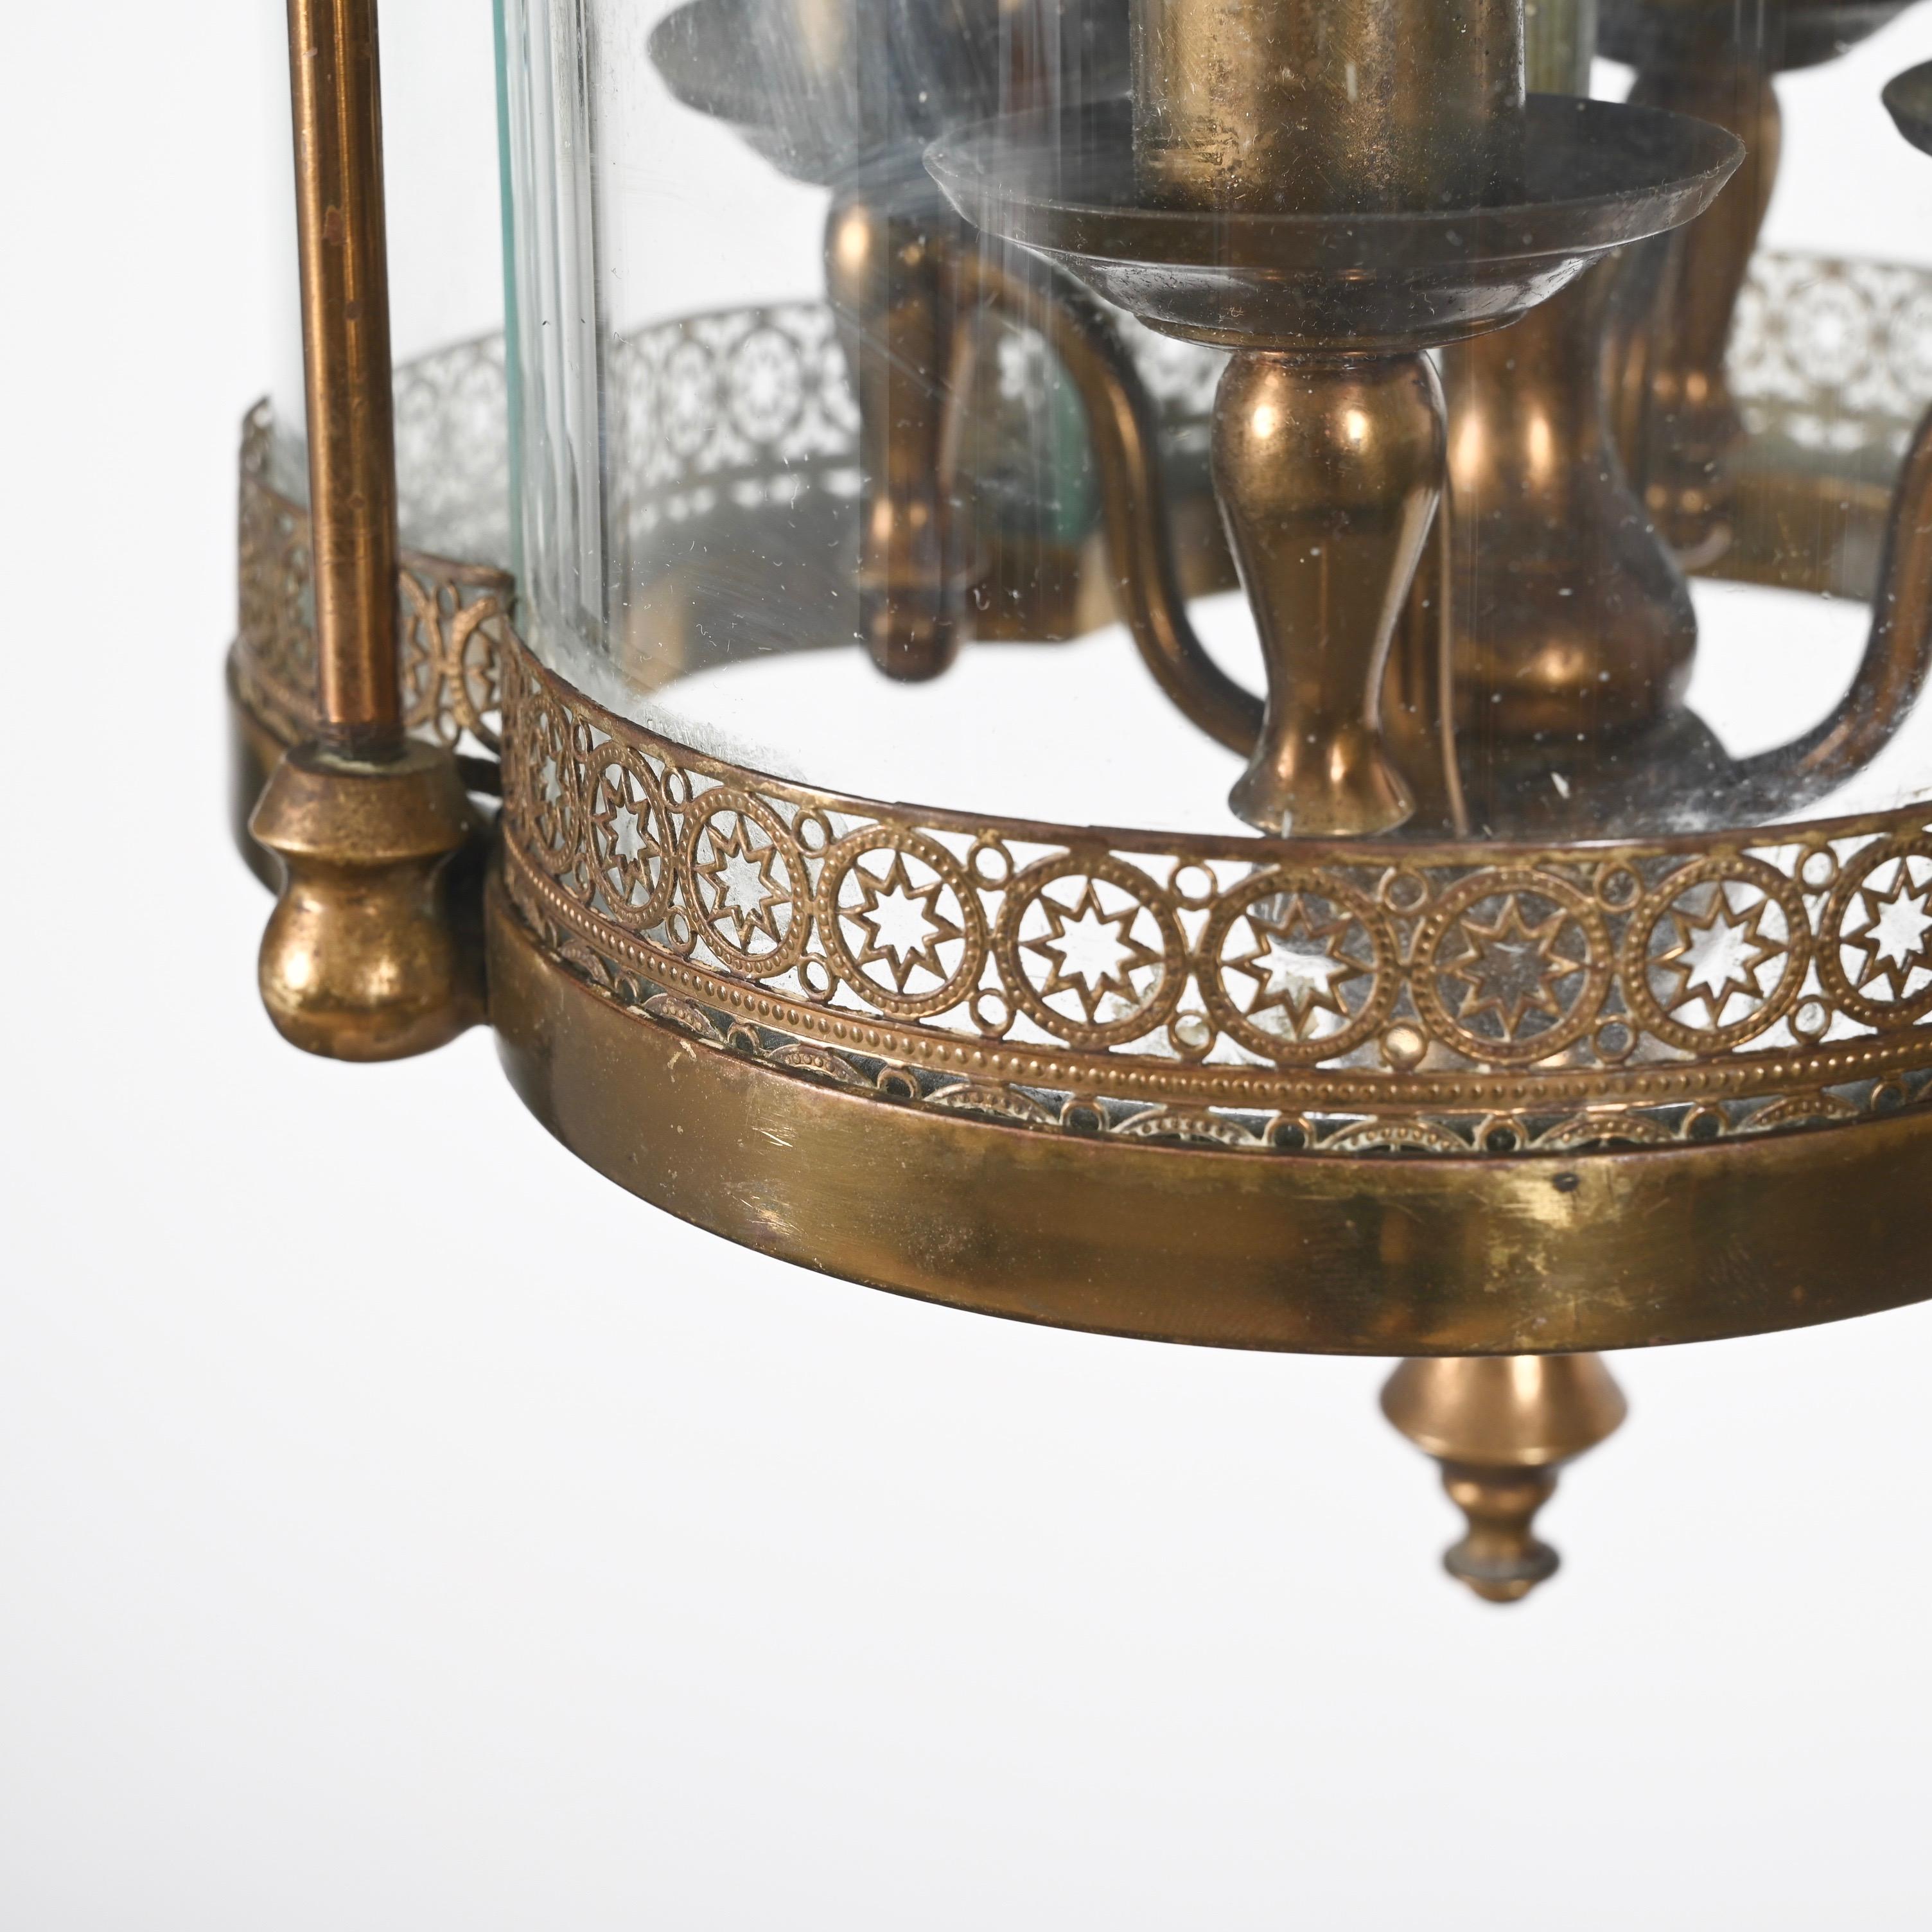 Art Deco Brass and Semicircular Glass Italian Chandelier after Adolf Loos, 1950s For Sale 15